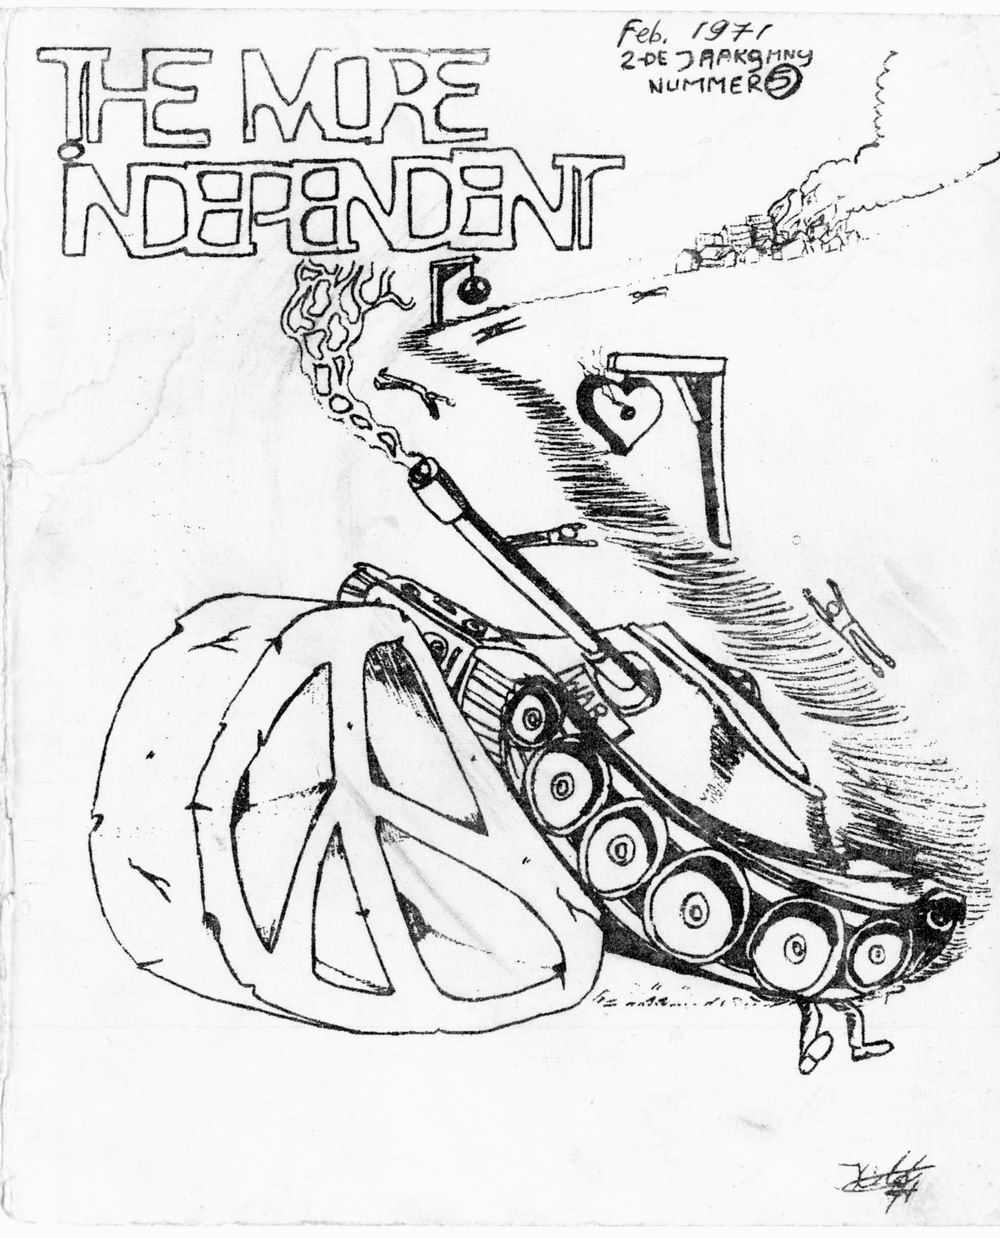 More Independent, 2, 5 (1971), cover